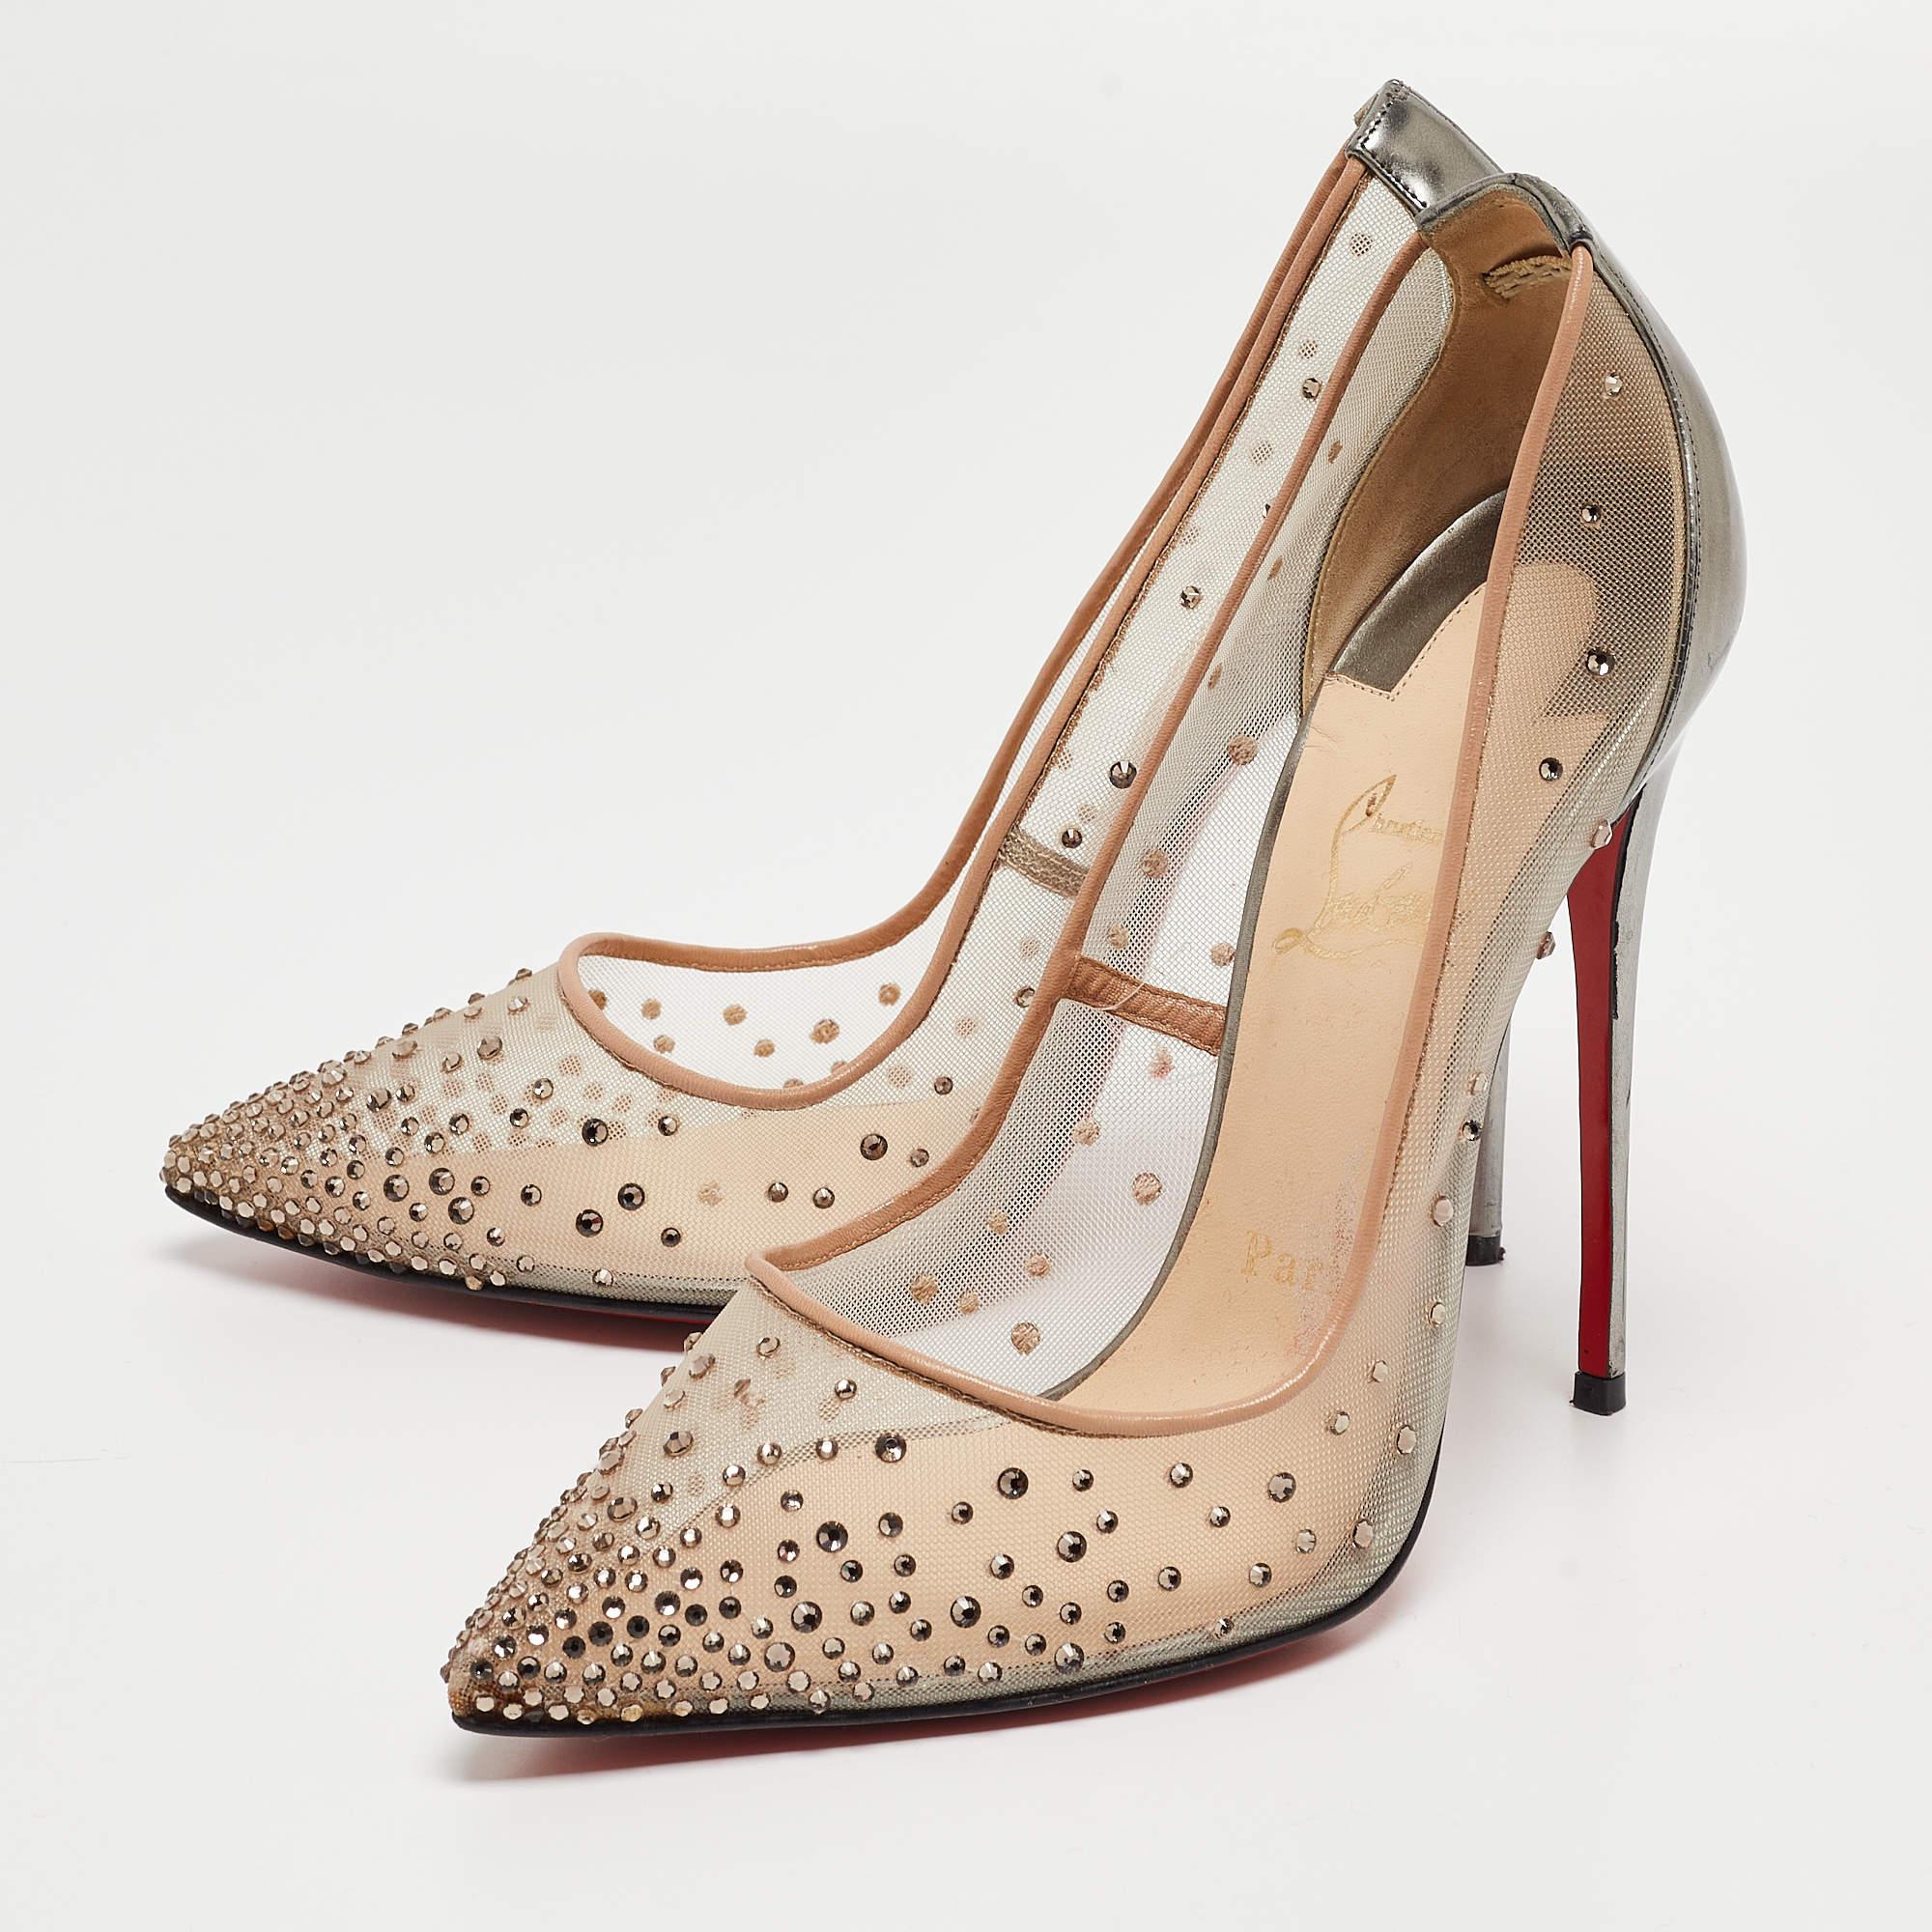 Make a chic style statement with these Christian Louboutin pumps. They showcase 12 cm heels and durable soles, perfect for your fashionable outings!

Includes: Original Dustbag, Extra Heel Tips

